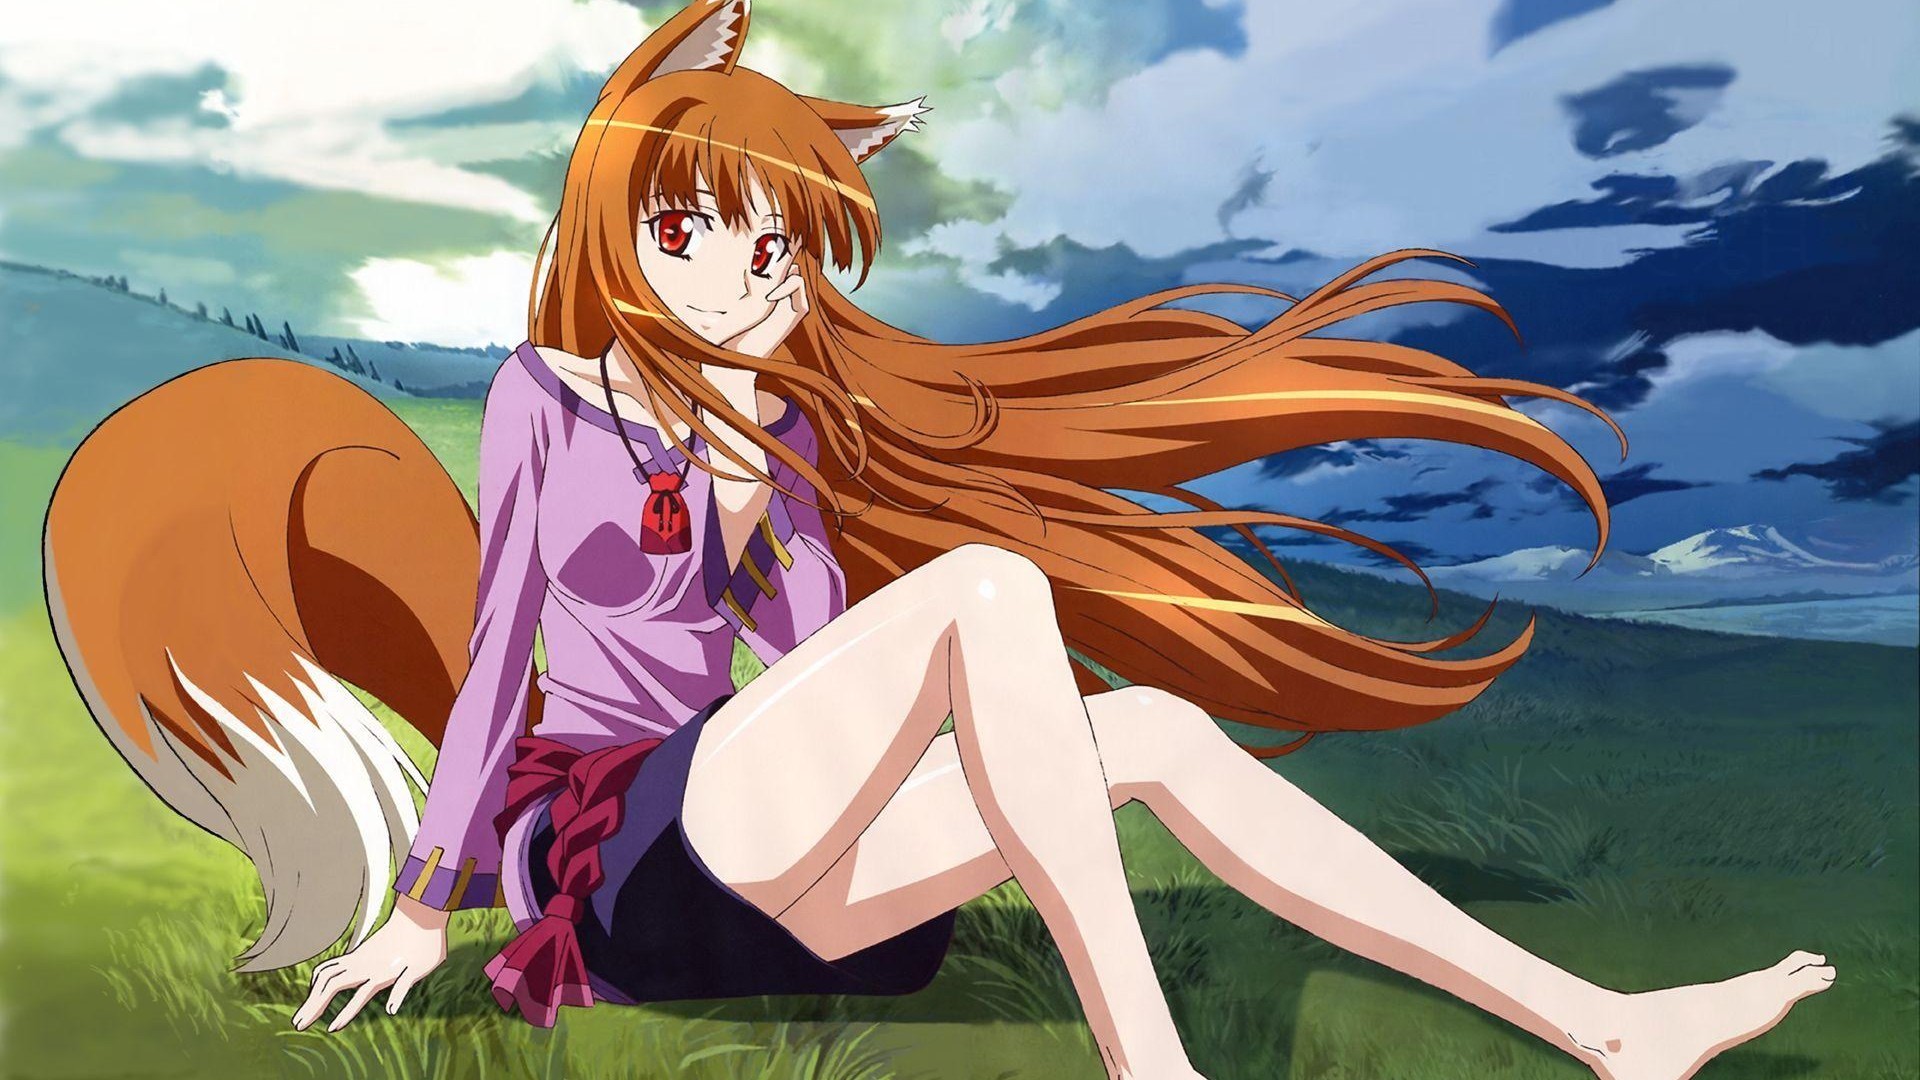 Holo in Spice and Wolf